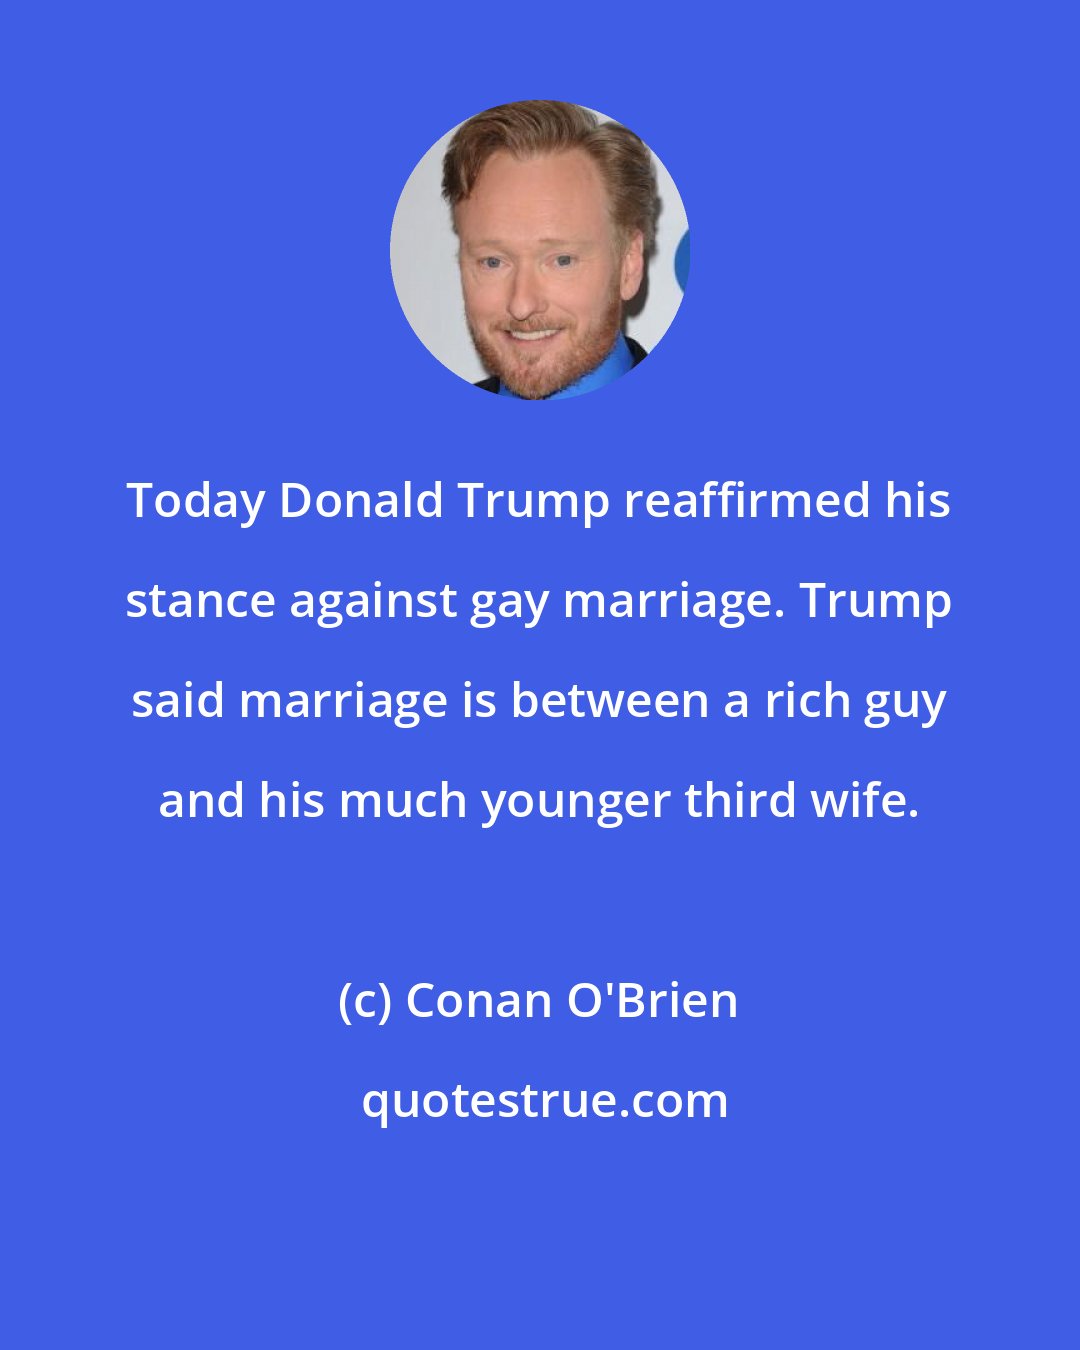 Conan O'Brien: Today Donald Trump reaffirmed his stance against gay marriage. Trump said marriage is between a rich guy and his much younger third wife.